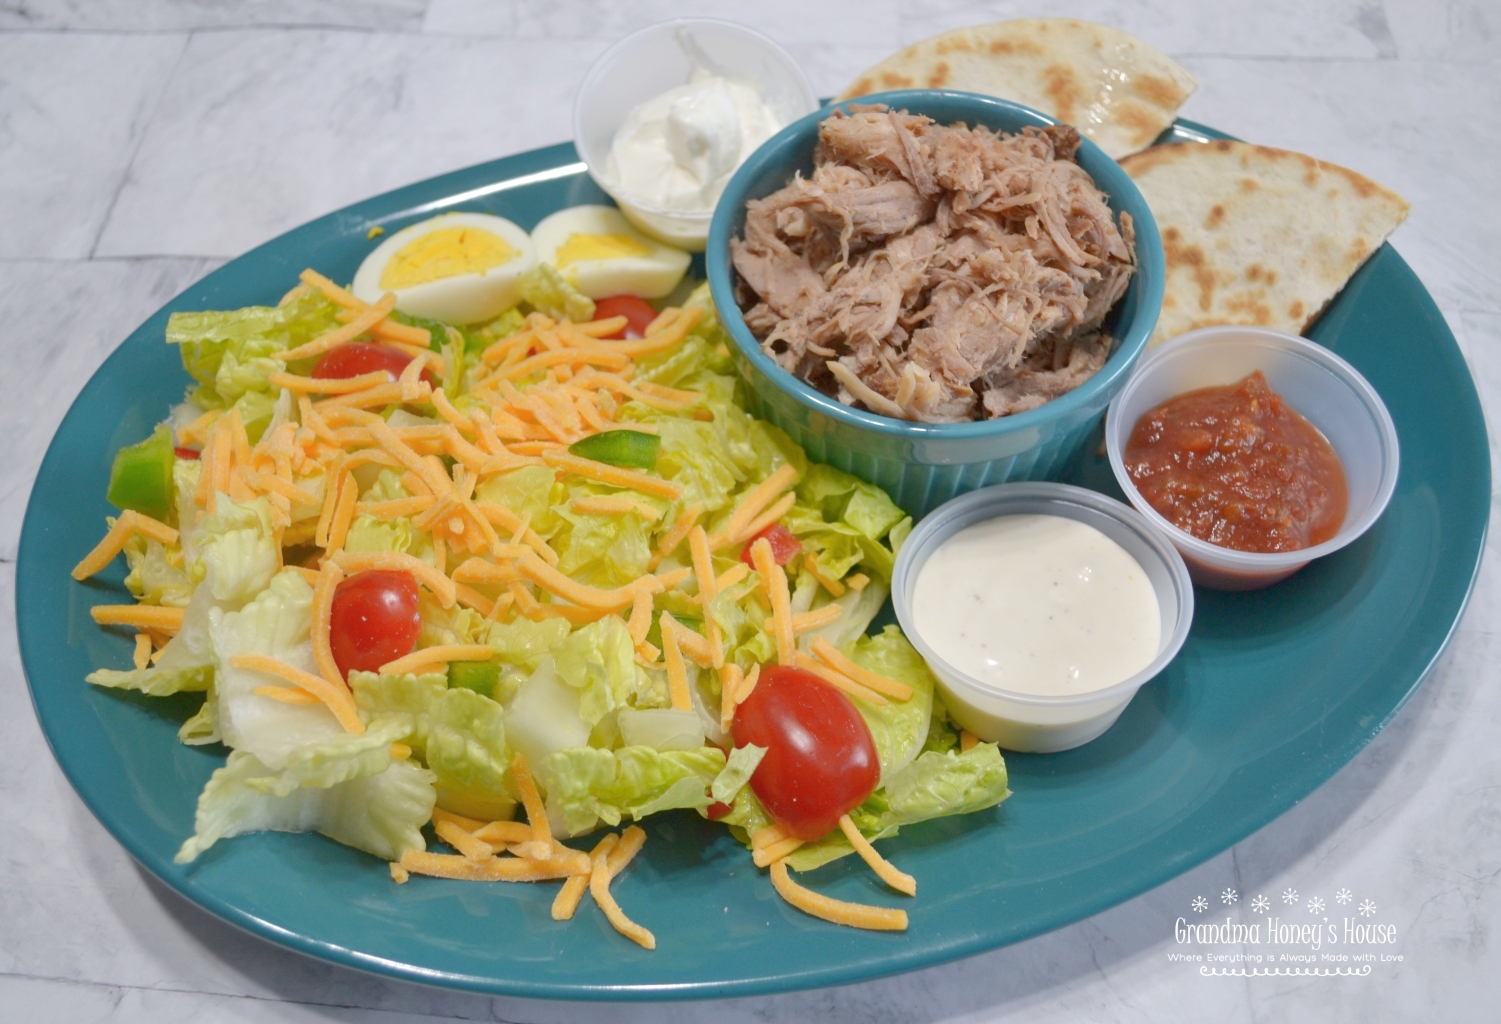 BBQ Pulled Pork Salad is a slow cooked,tender pork butt with sauce served on a bed of lettuce,veggies,cheese and topped with ranch dressing. 